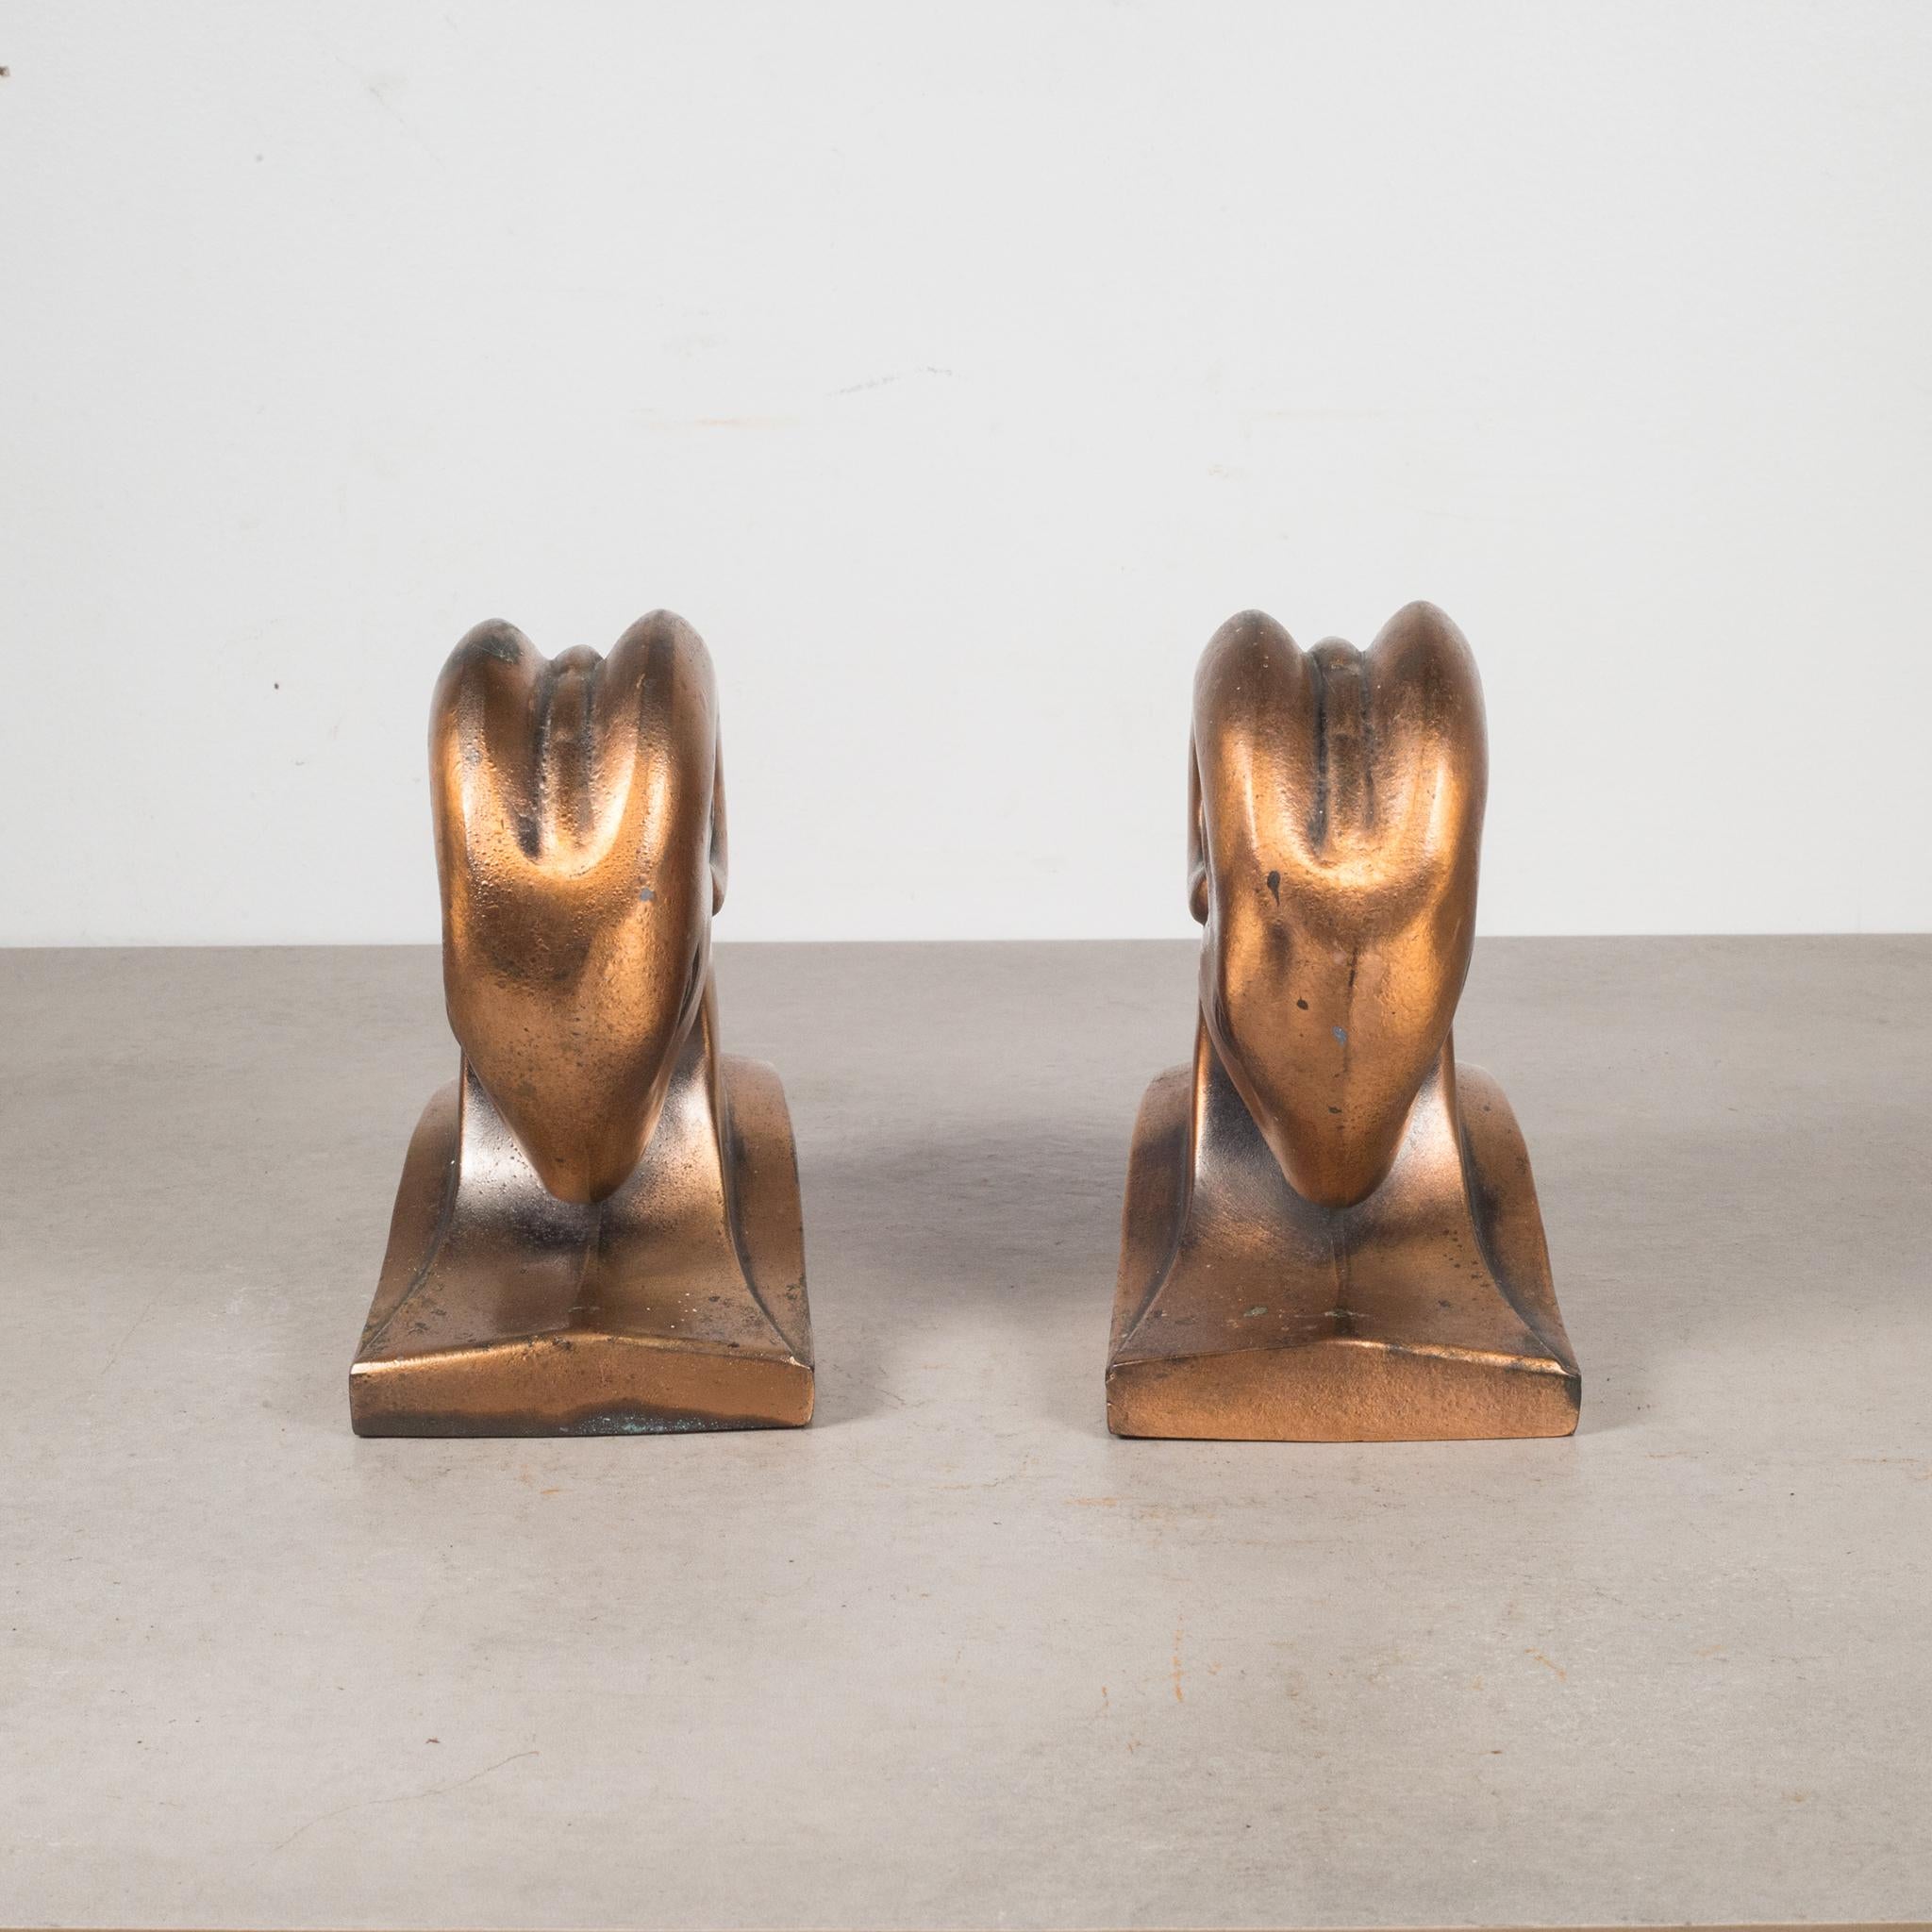 Plated Art Deco Ram's Head Bookends by Cornell Foundry, circa 1930